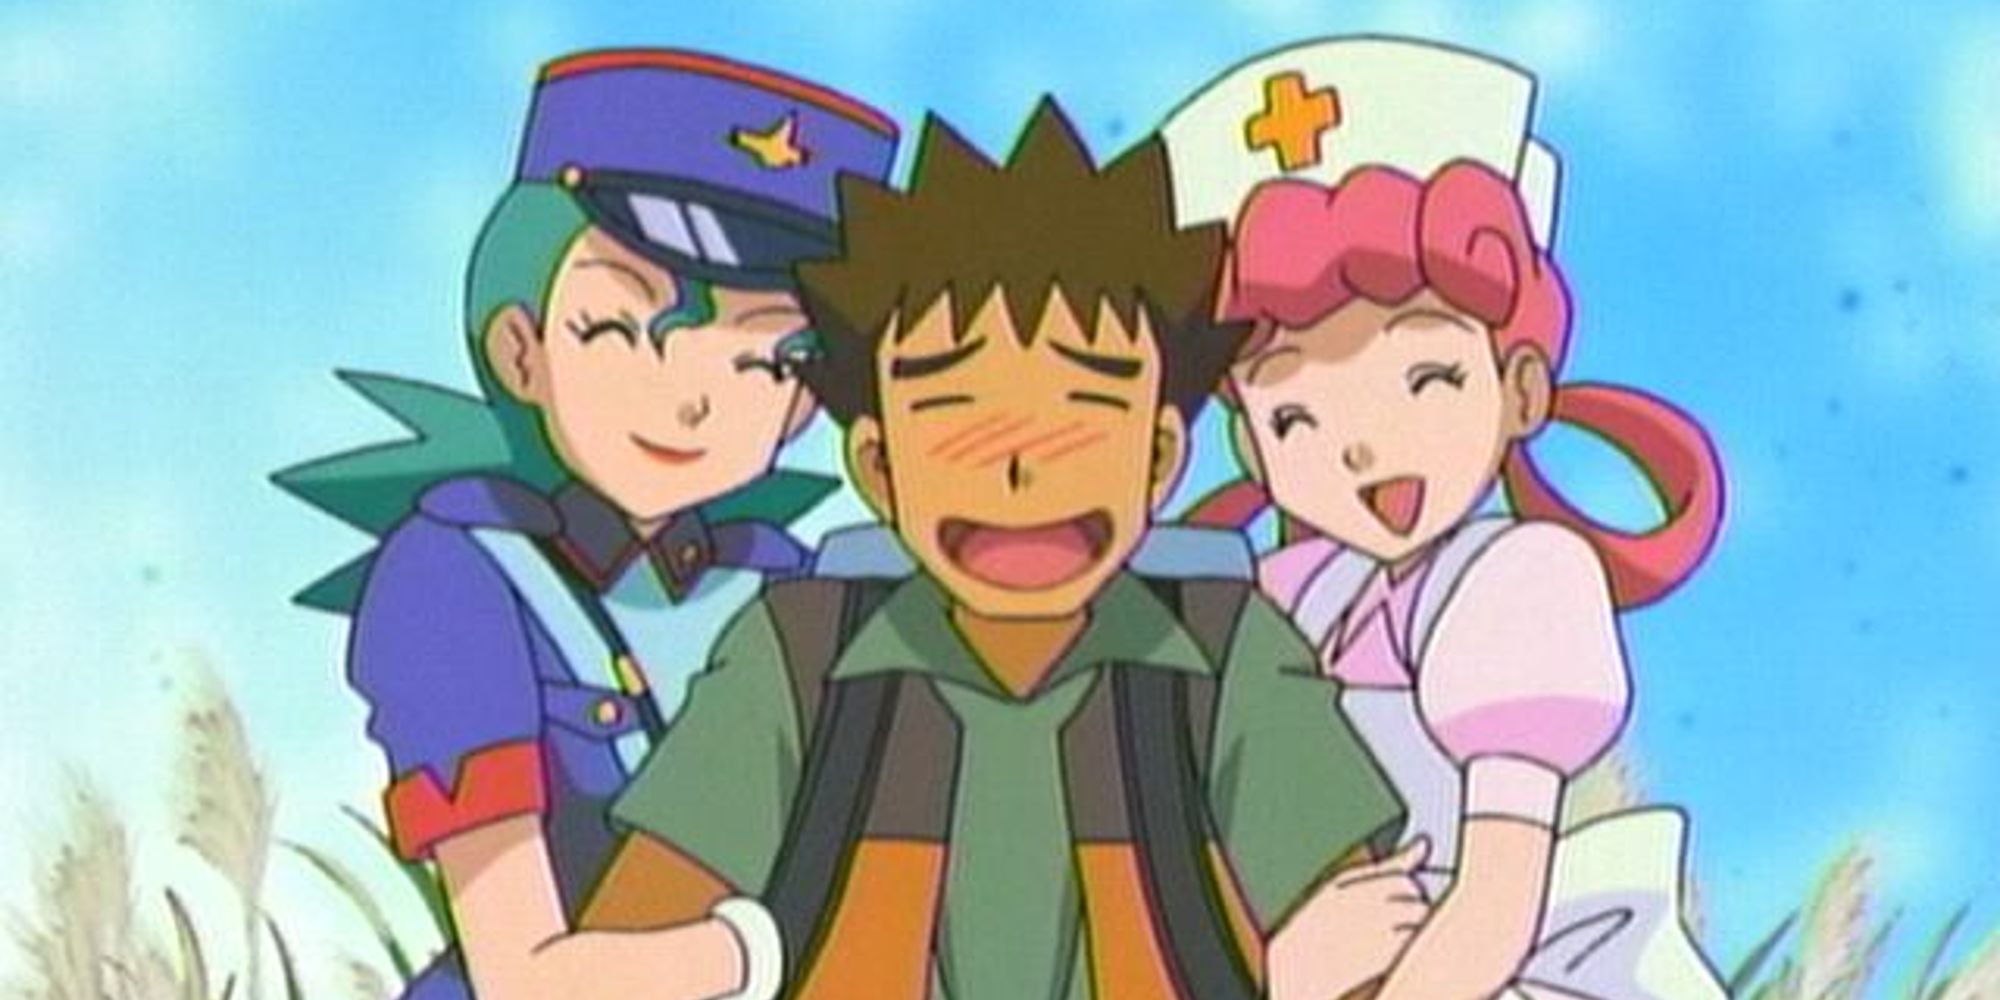 Brock surrounded by an affectionate Nurse Joy and Officer Jenny